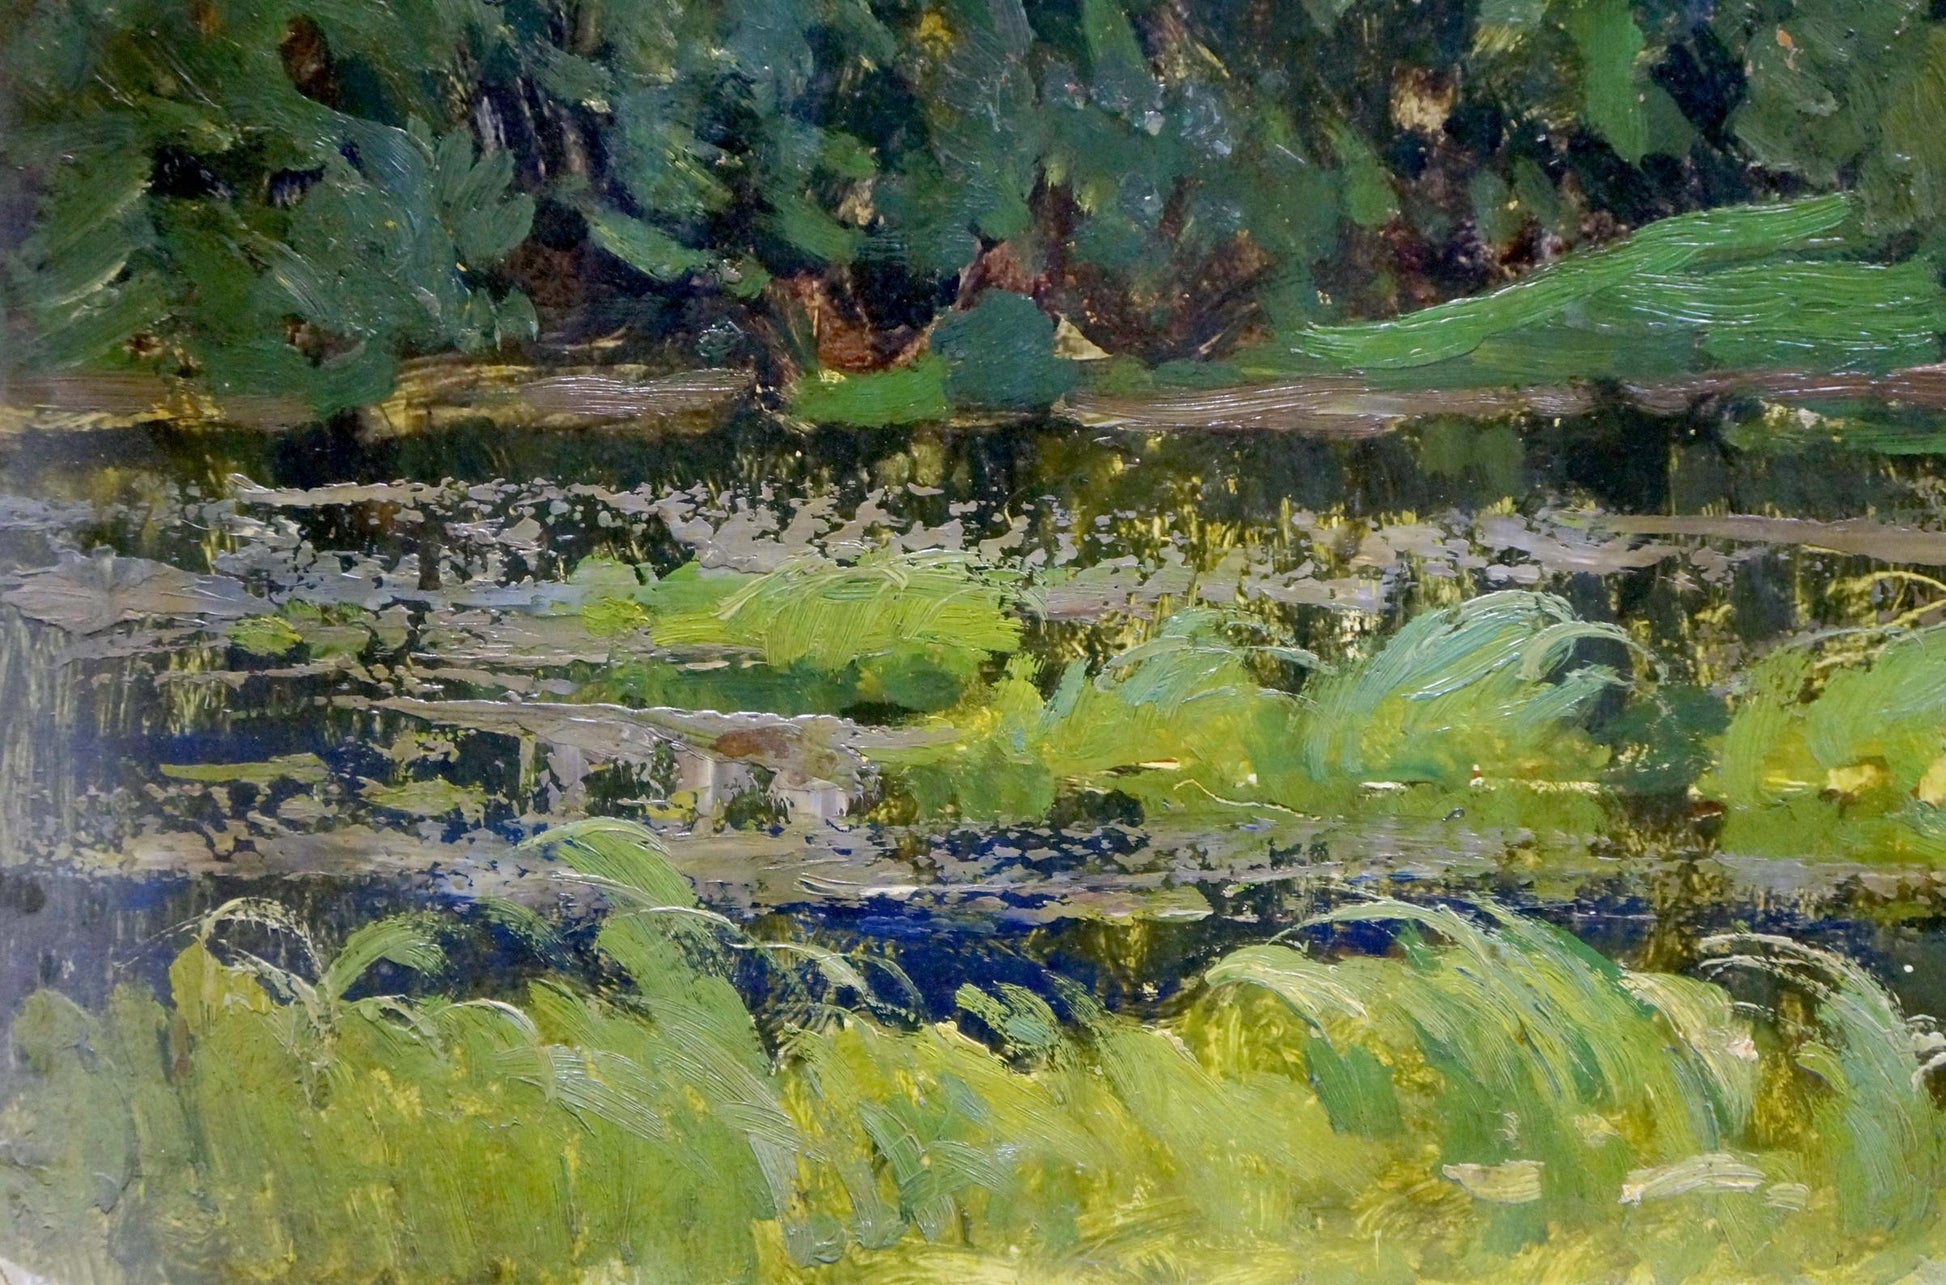 Vladimir Andreevich Korobov's oil painting depicting a river landscape